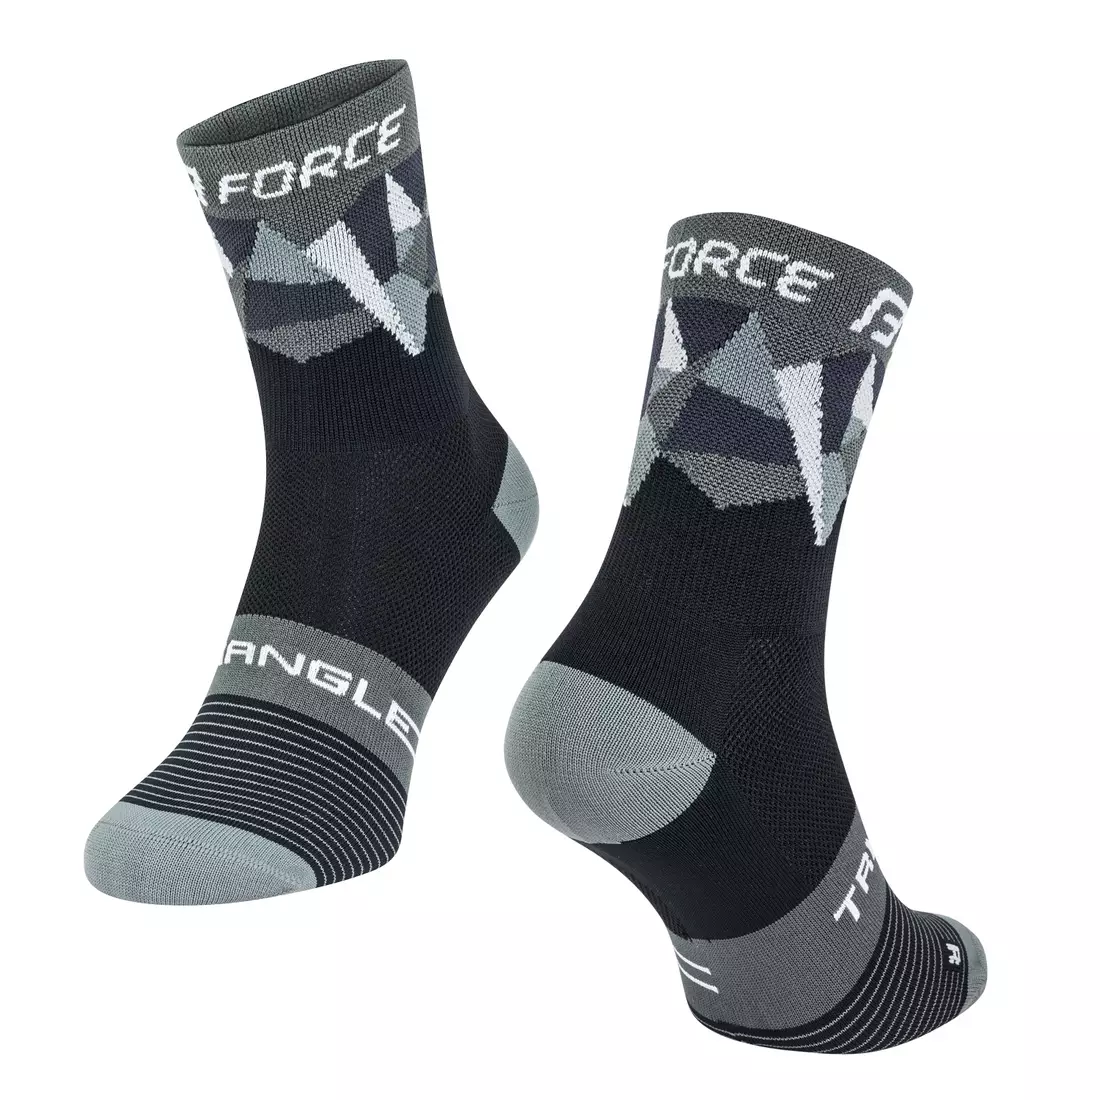 FORCE TRIANGLE cycling/sports socks, black and gray